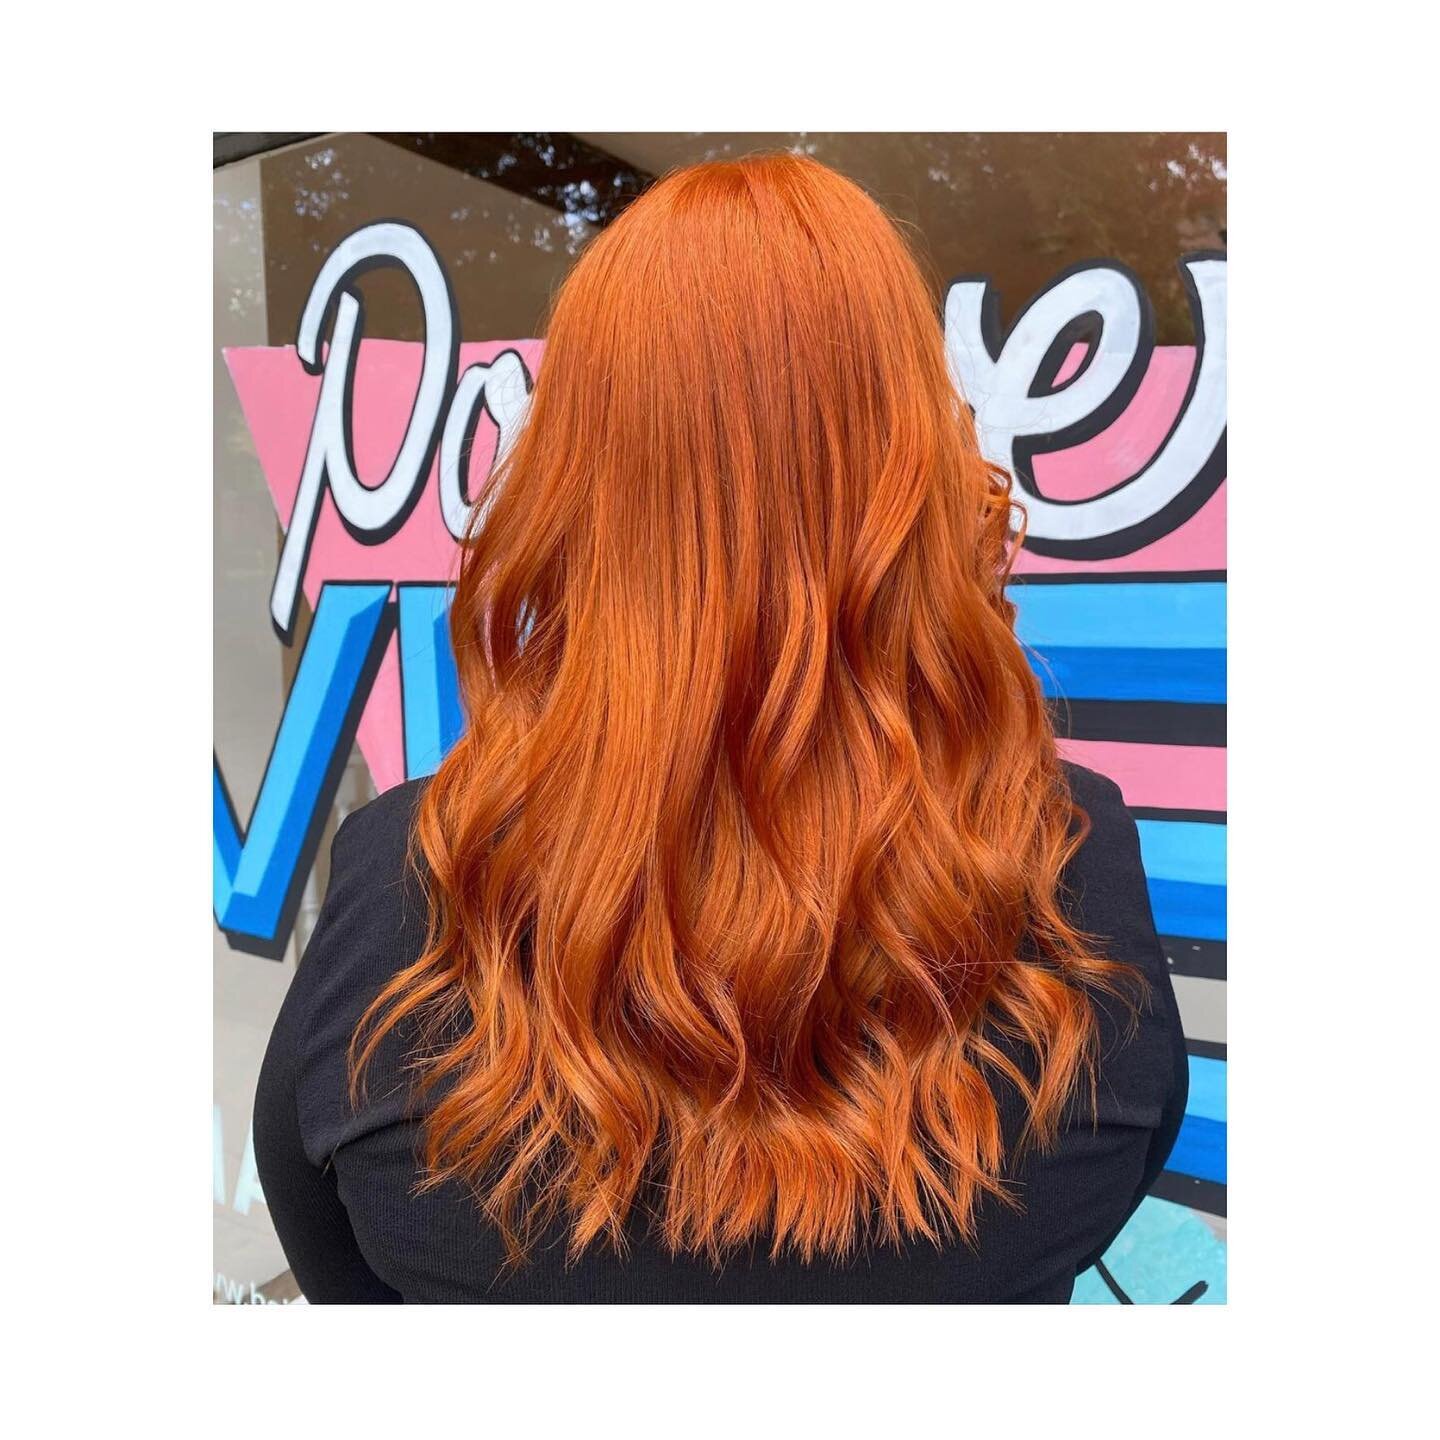 BOOM

We are in love with this fox red number in salon by our gal Jess. The deeply nourished lengths &amp; kilowatt tone is giving us life! 

Hair: @hairbyjt__ using @wellahairuki @olaplex 
Styled using: @labelmuk 

To book your complimentary consult